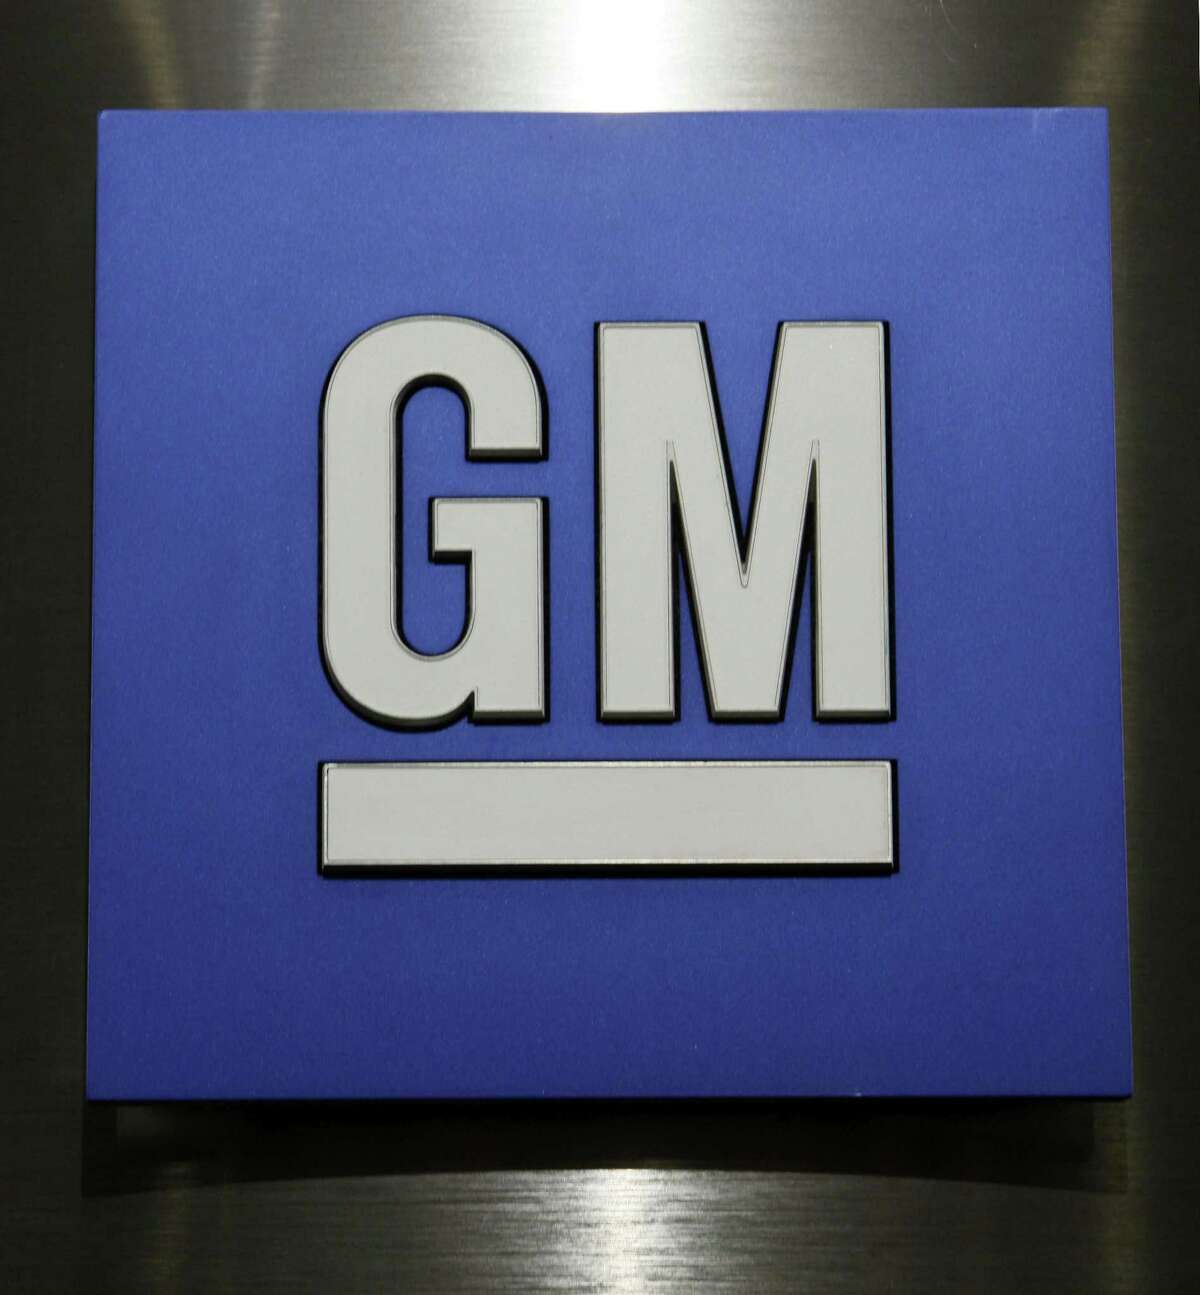 General Motors Co. logo is shown during a news conference in Detroit on Feb. 4, 2015.